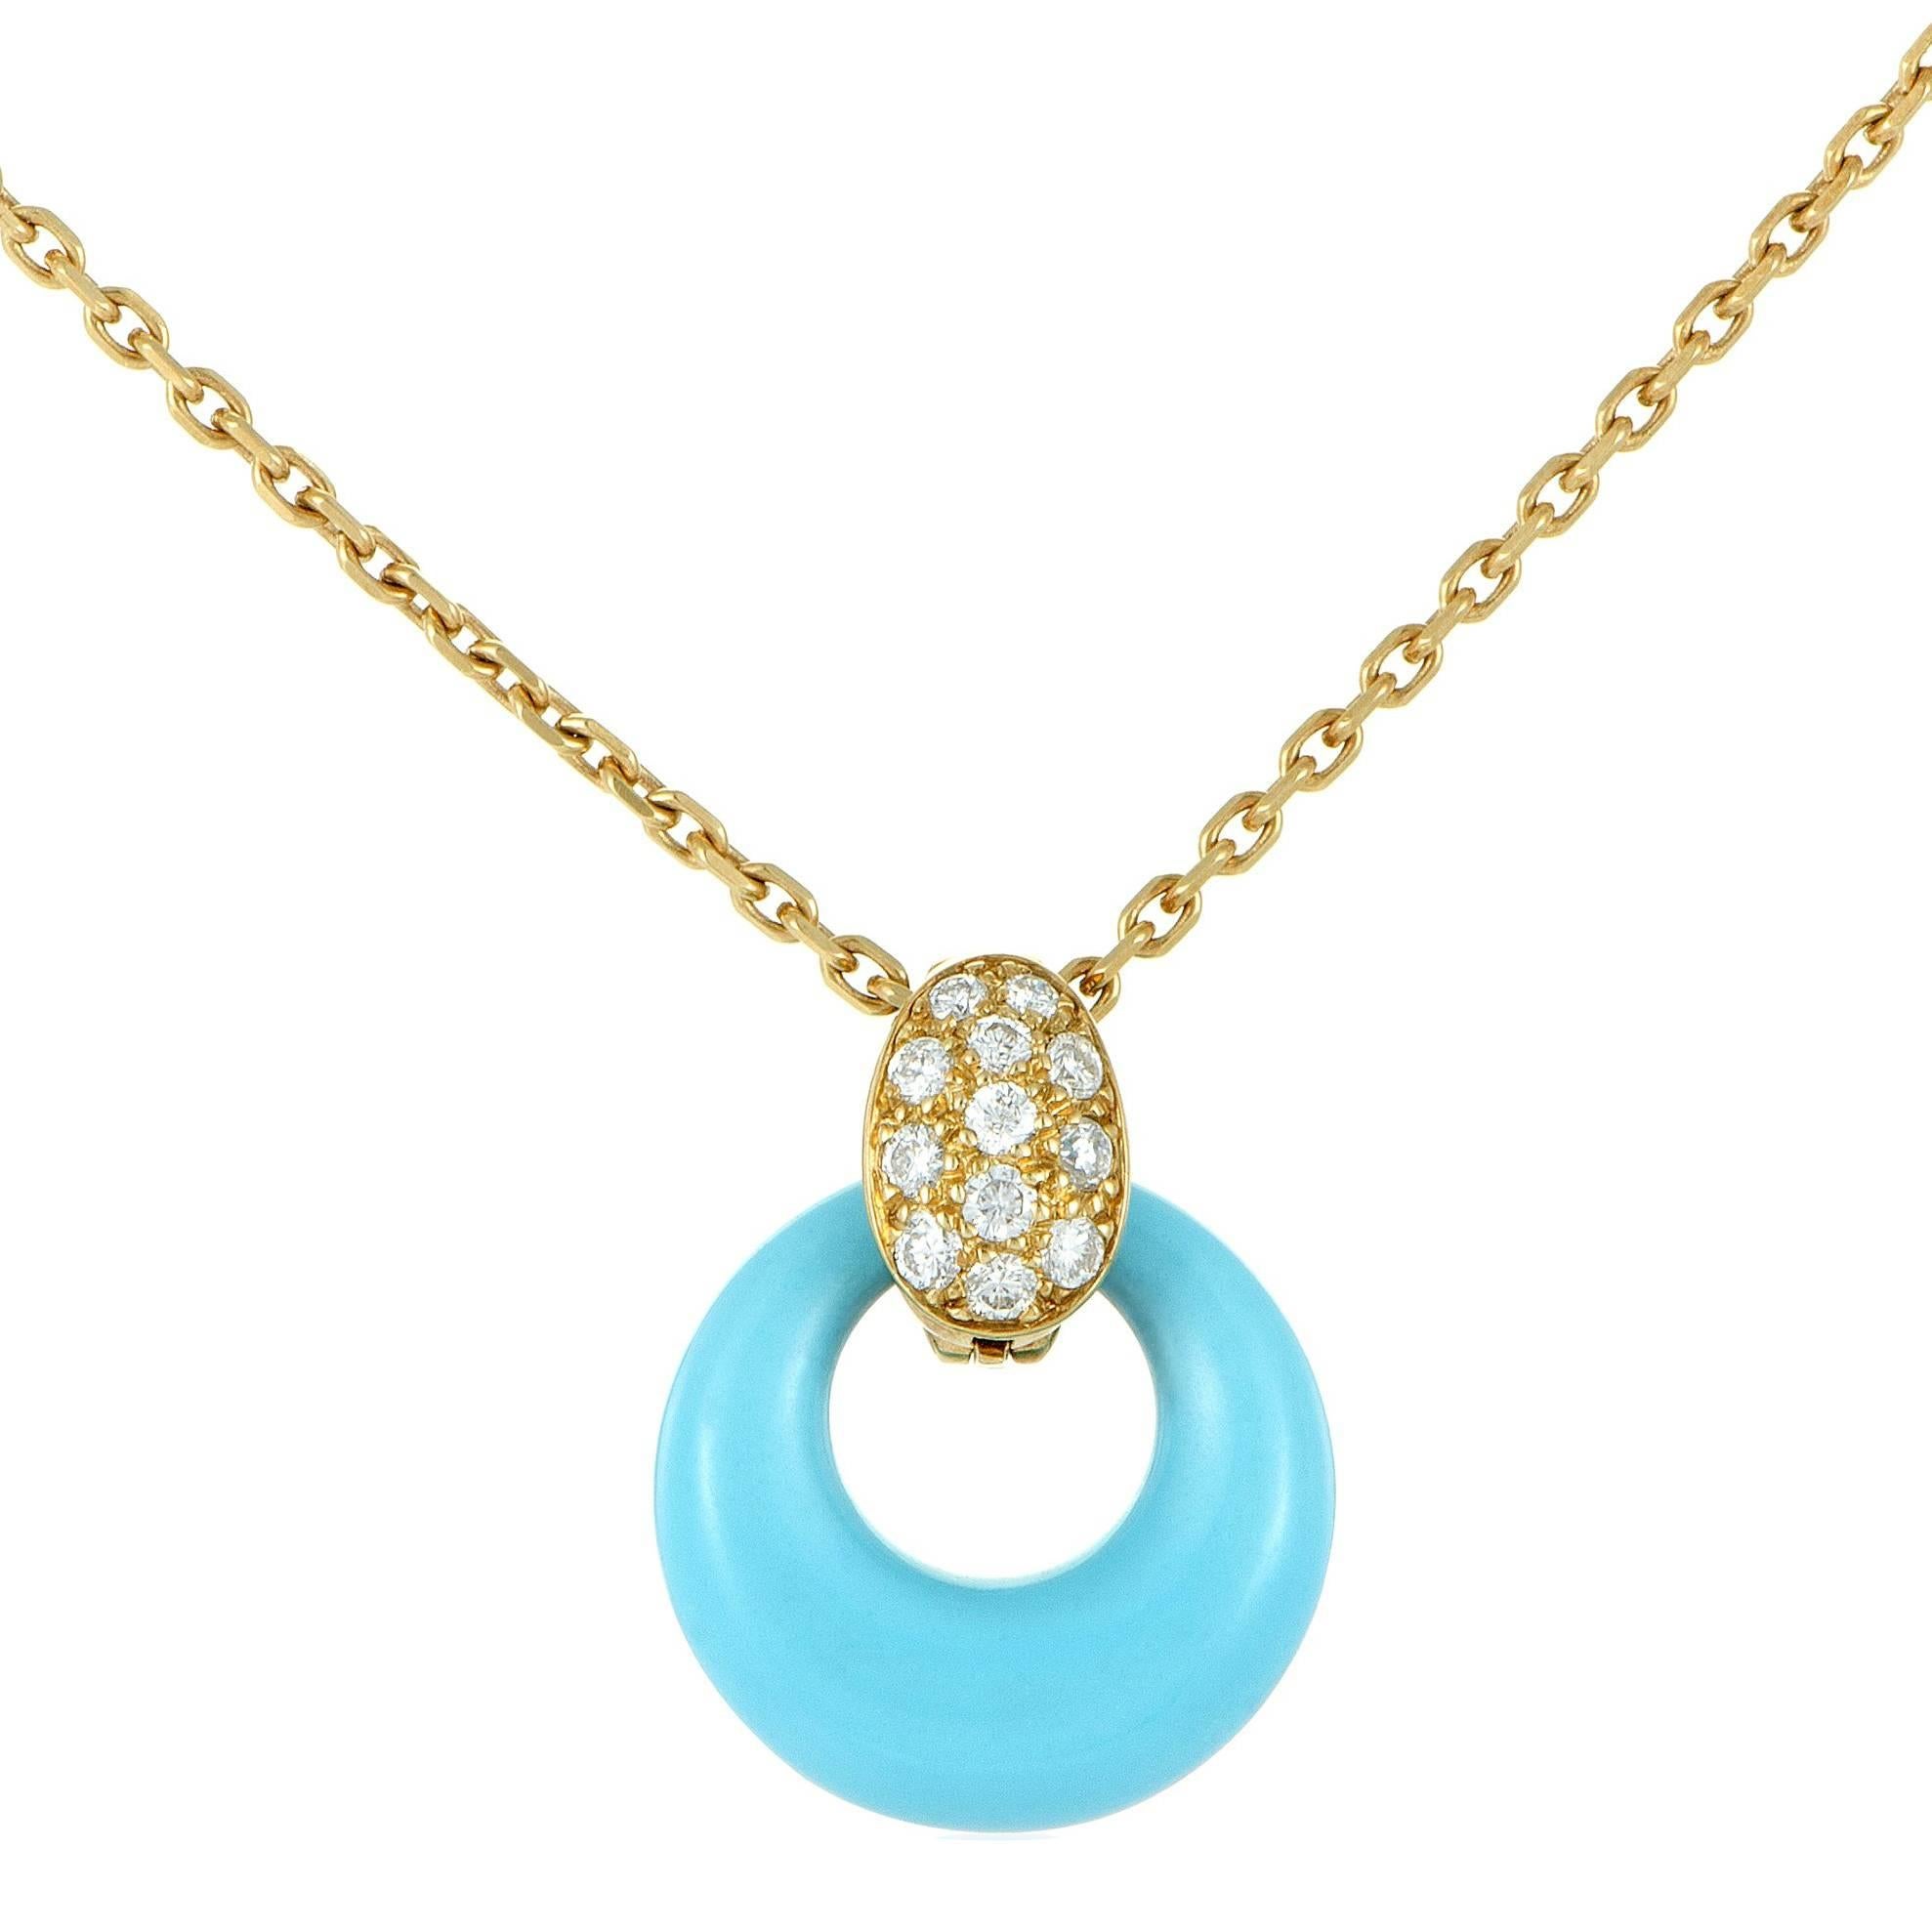 Van Cleef & Arpels Diamond and Turquoise Yellow Gold Pendant Necklace